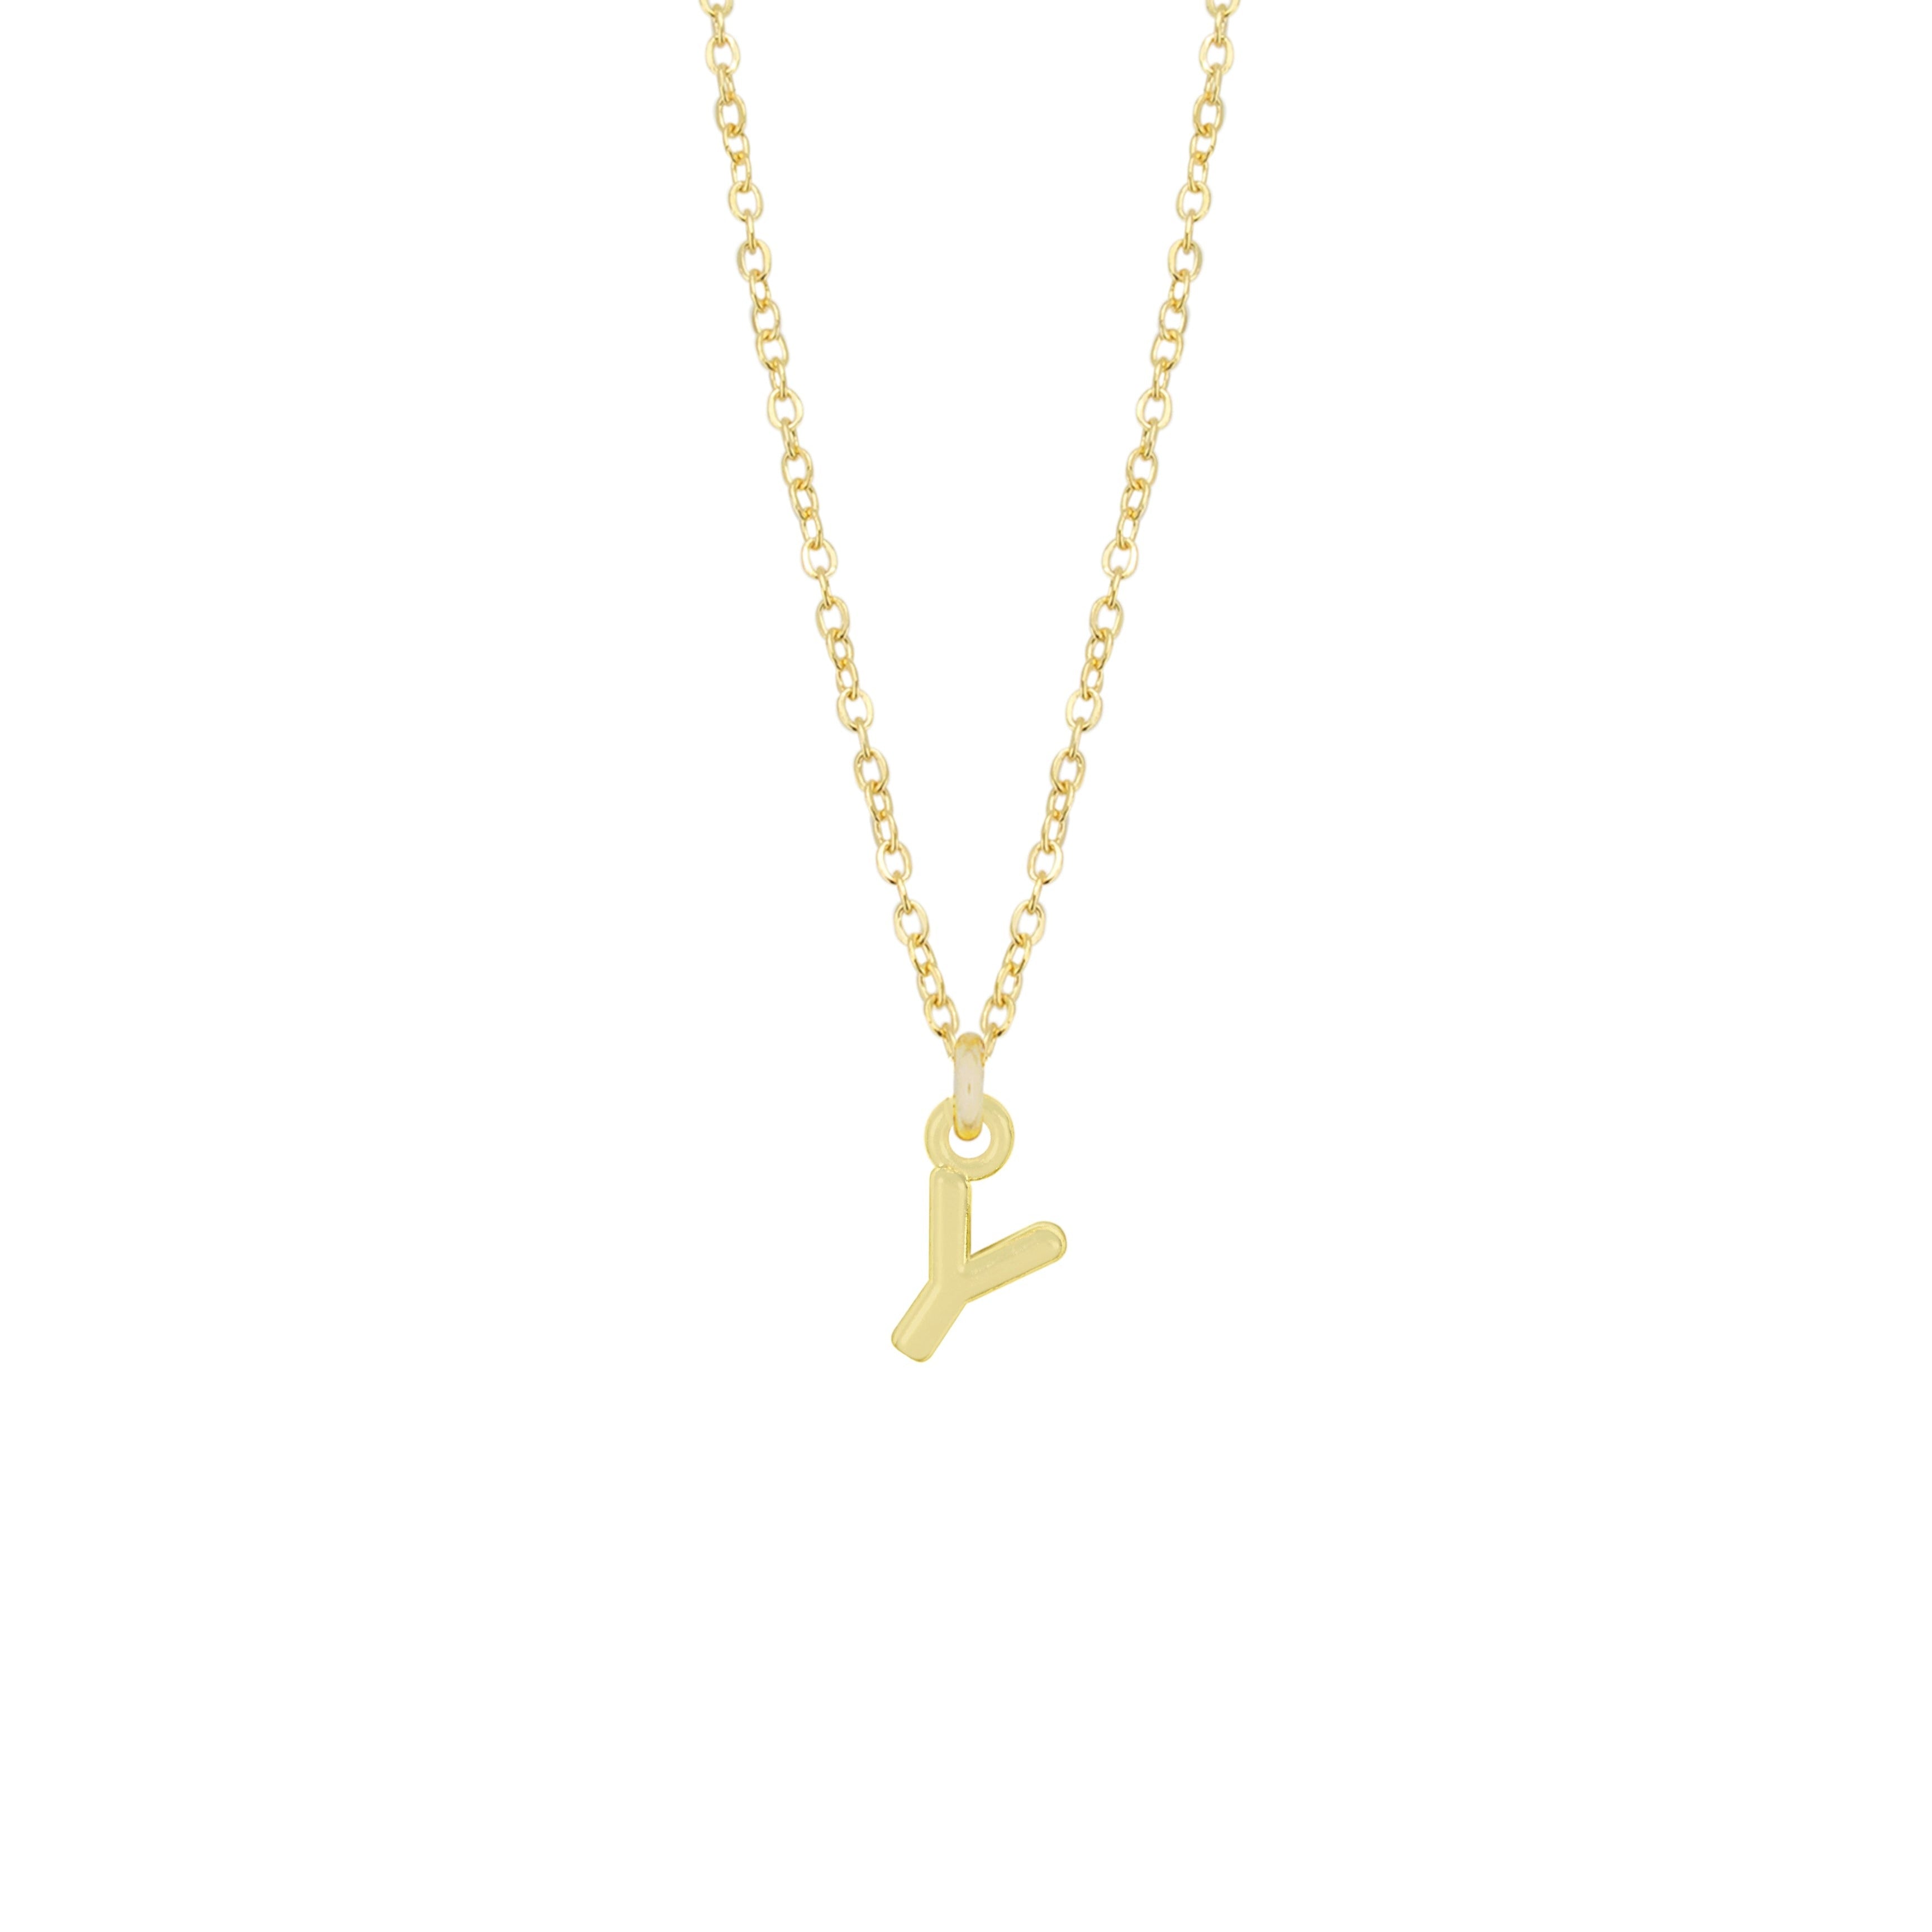 Y Gold Initial Necklace by Katie Dean Jewelry, made in America, perfect for the dainty minimal jewelry lovers